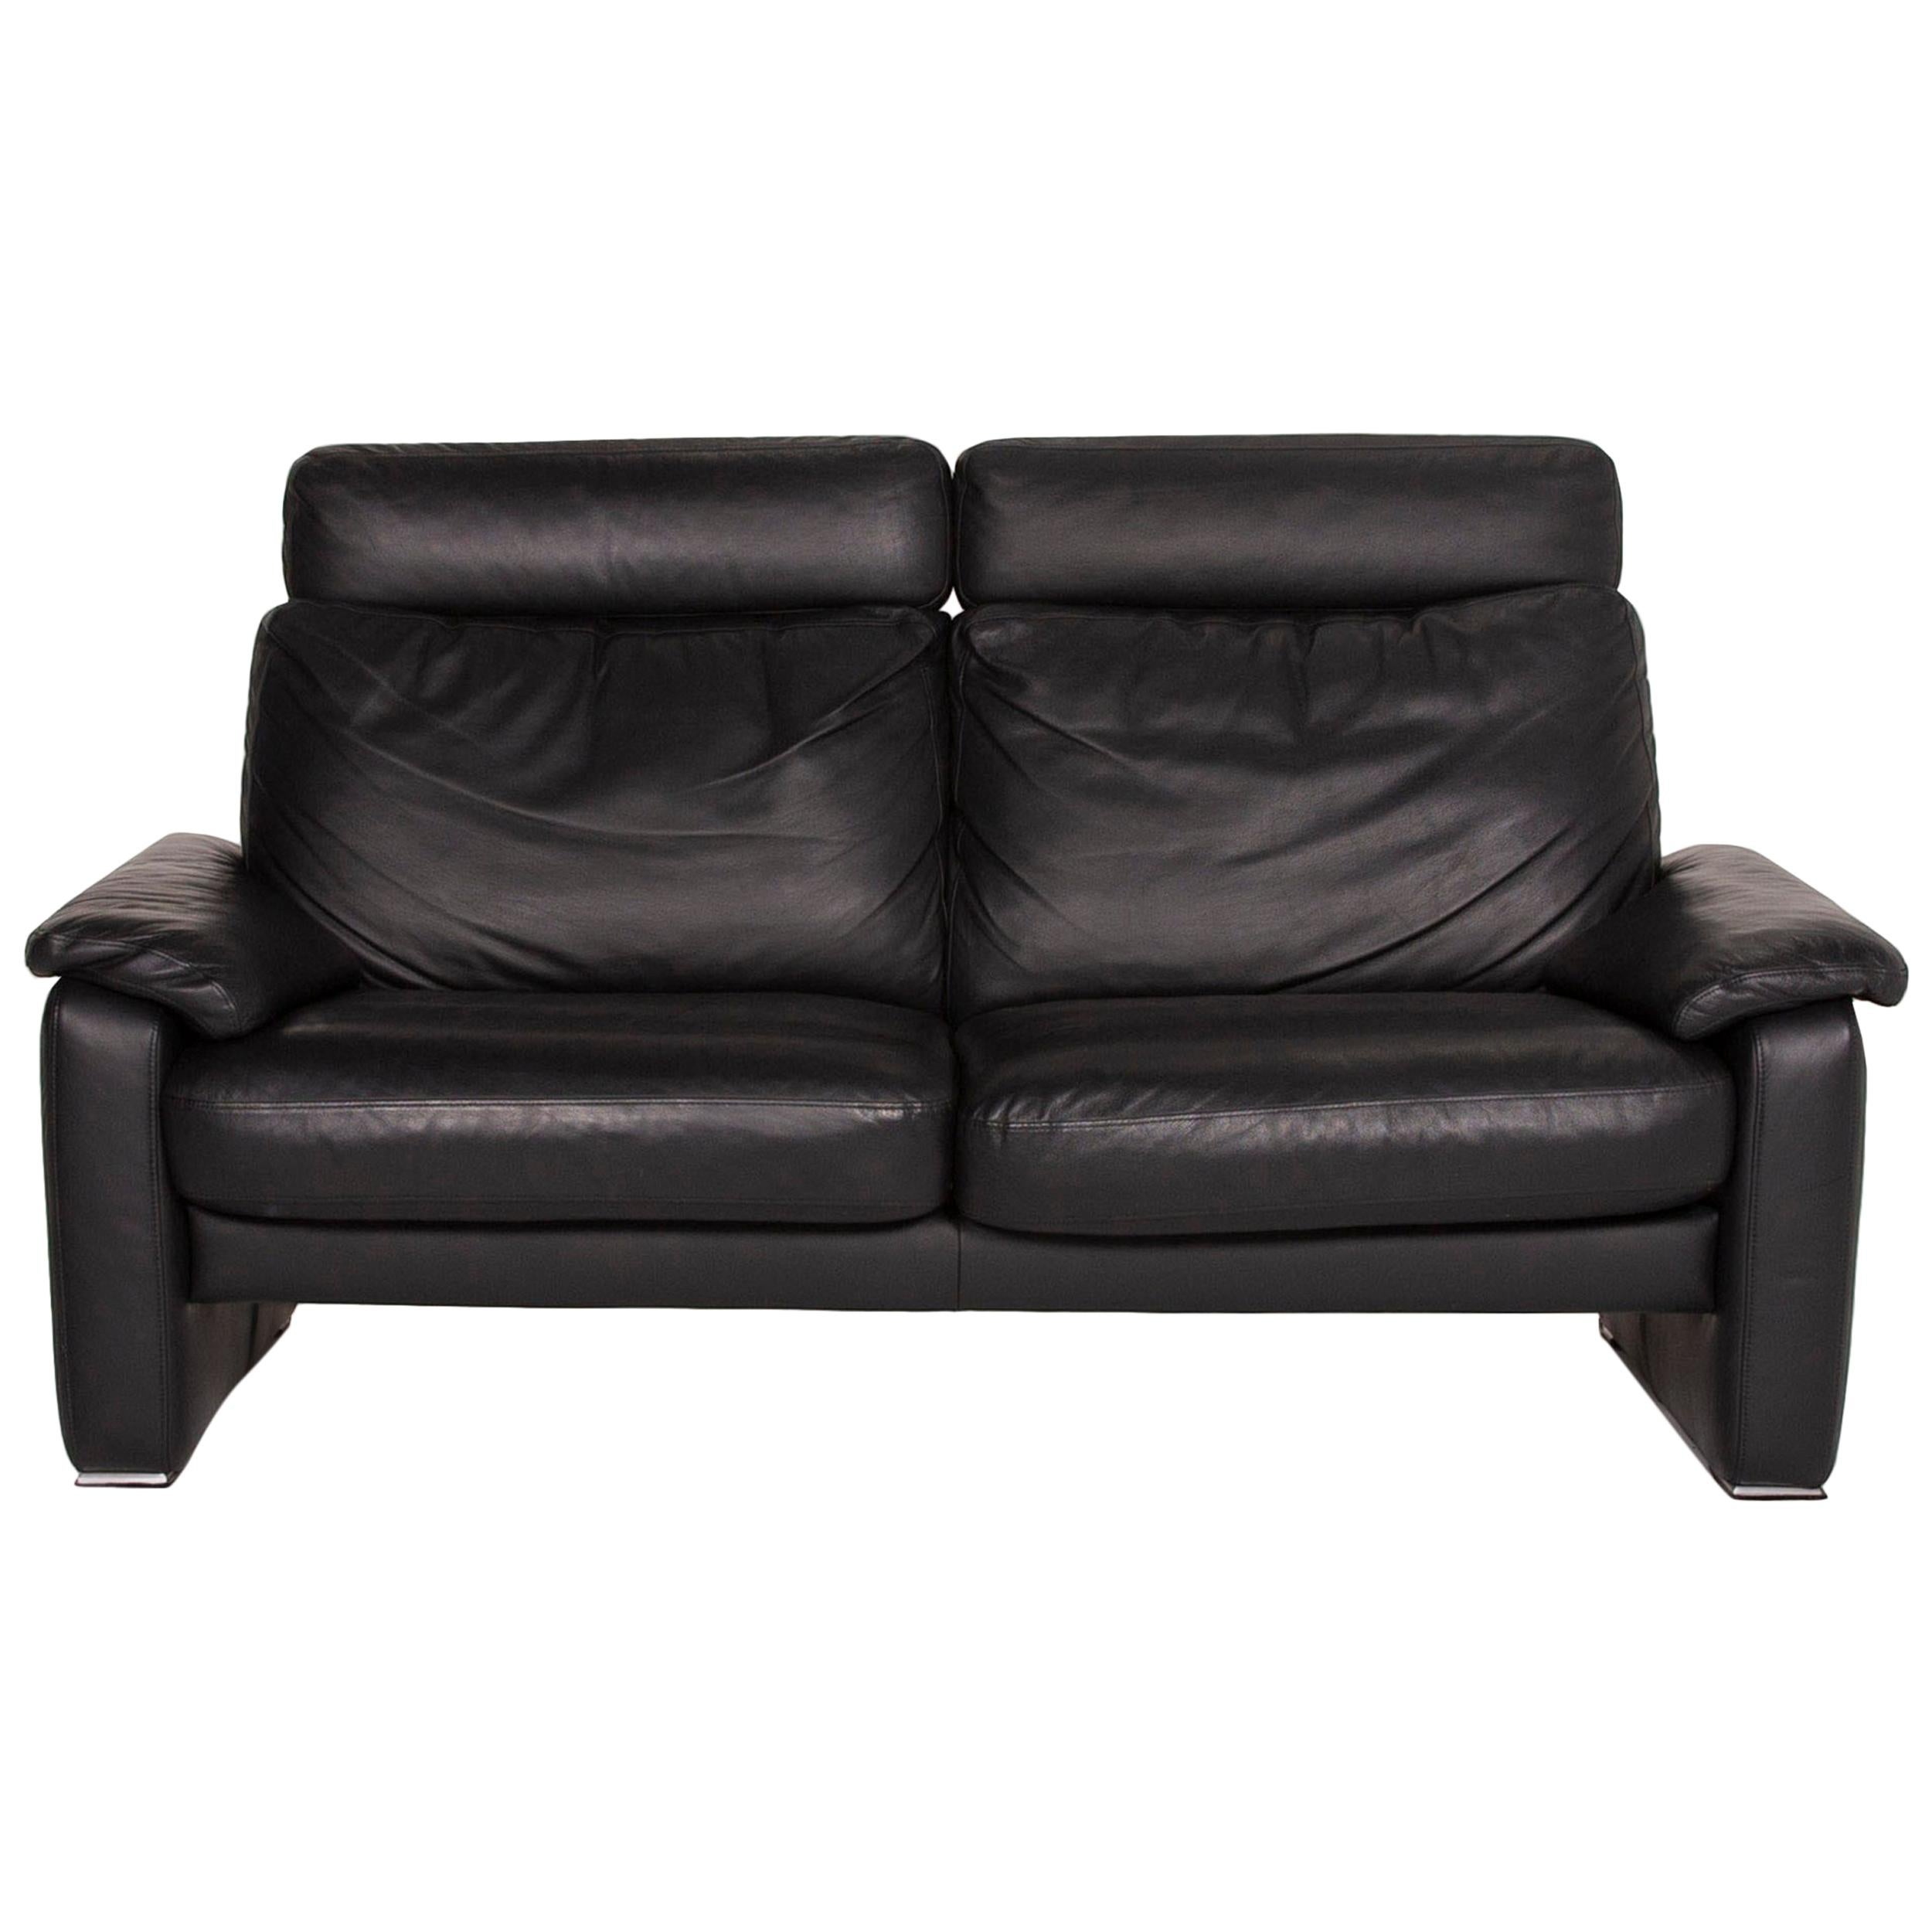 Ewald Schillig Leather Sofa Black Two-Seat For Sale